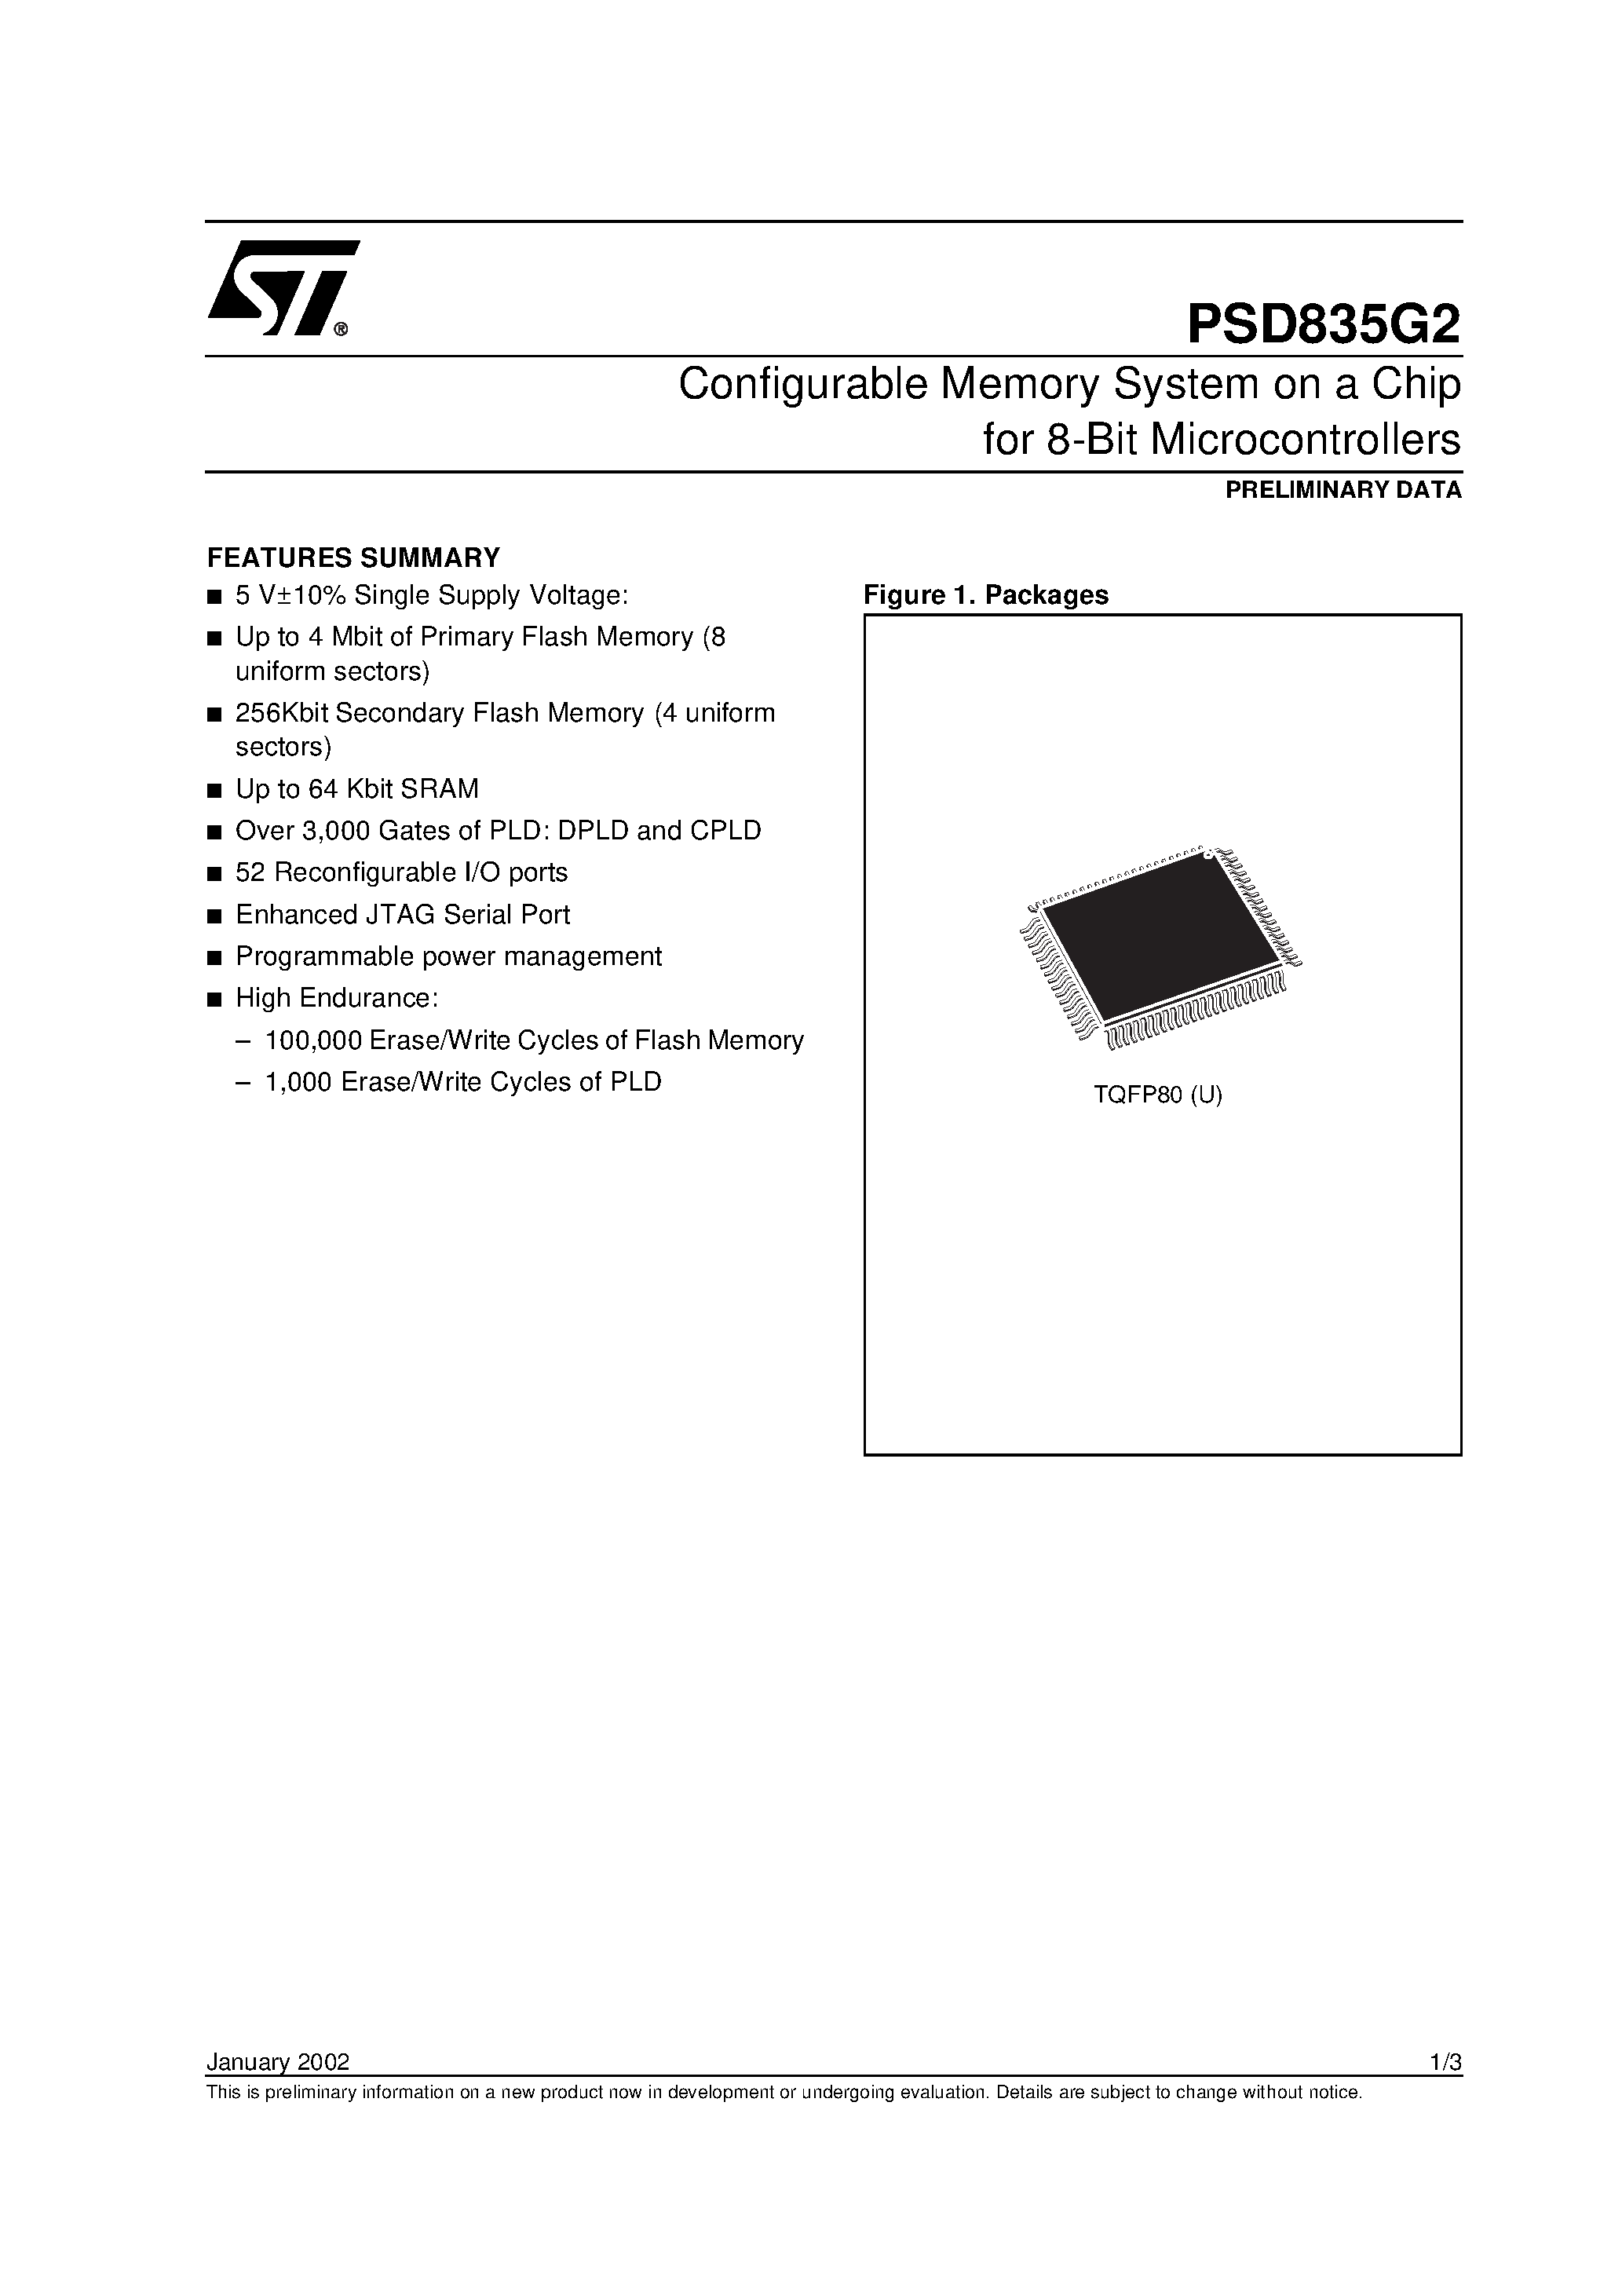 Datasheet PSD835F1-A-15U - Configurable Memory System on a Chip for 8-Bit Microcontrollers page 1